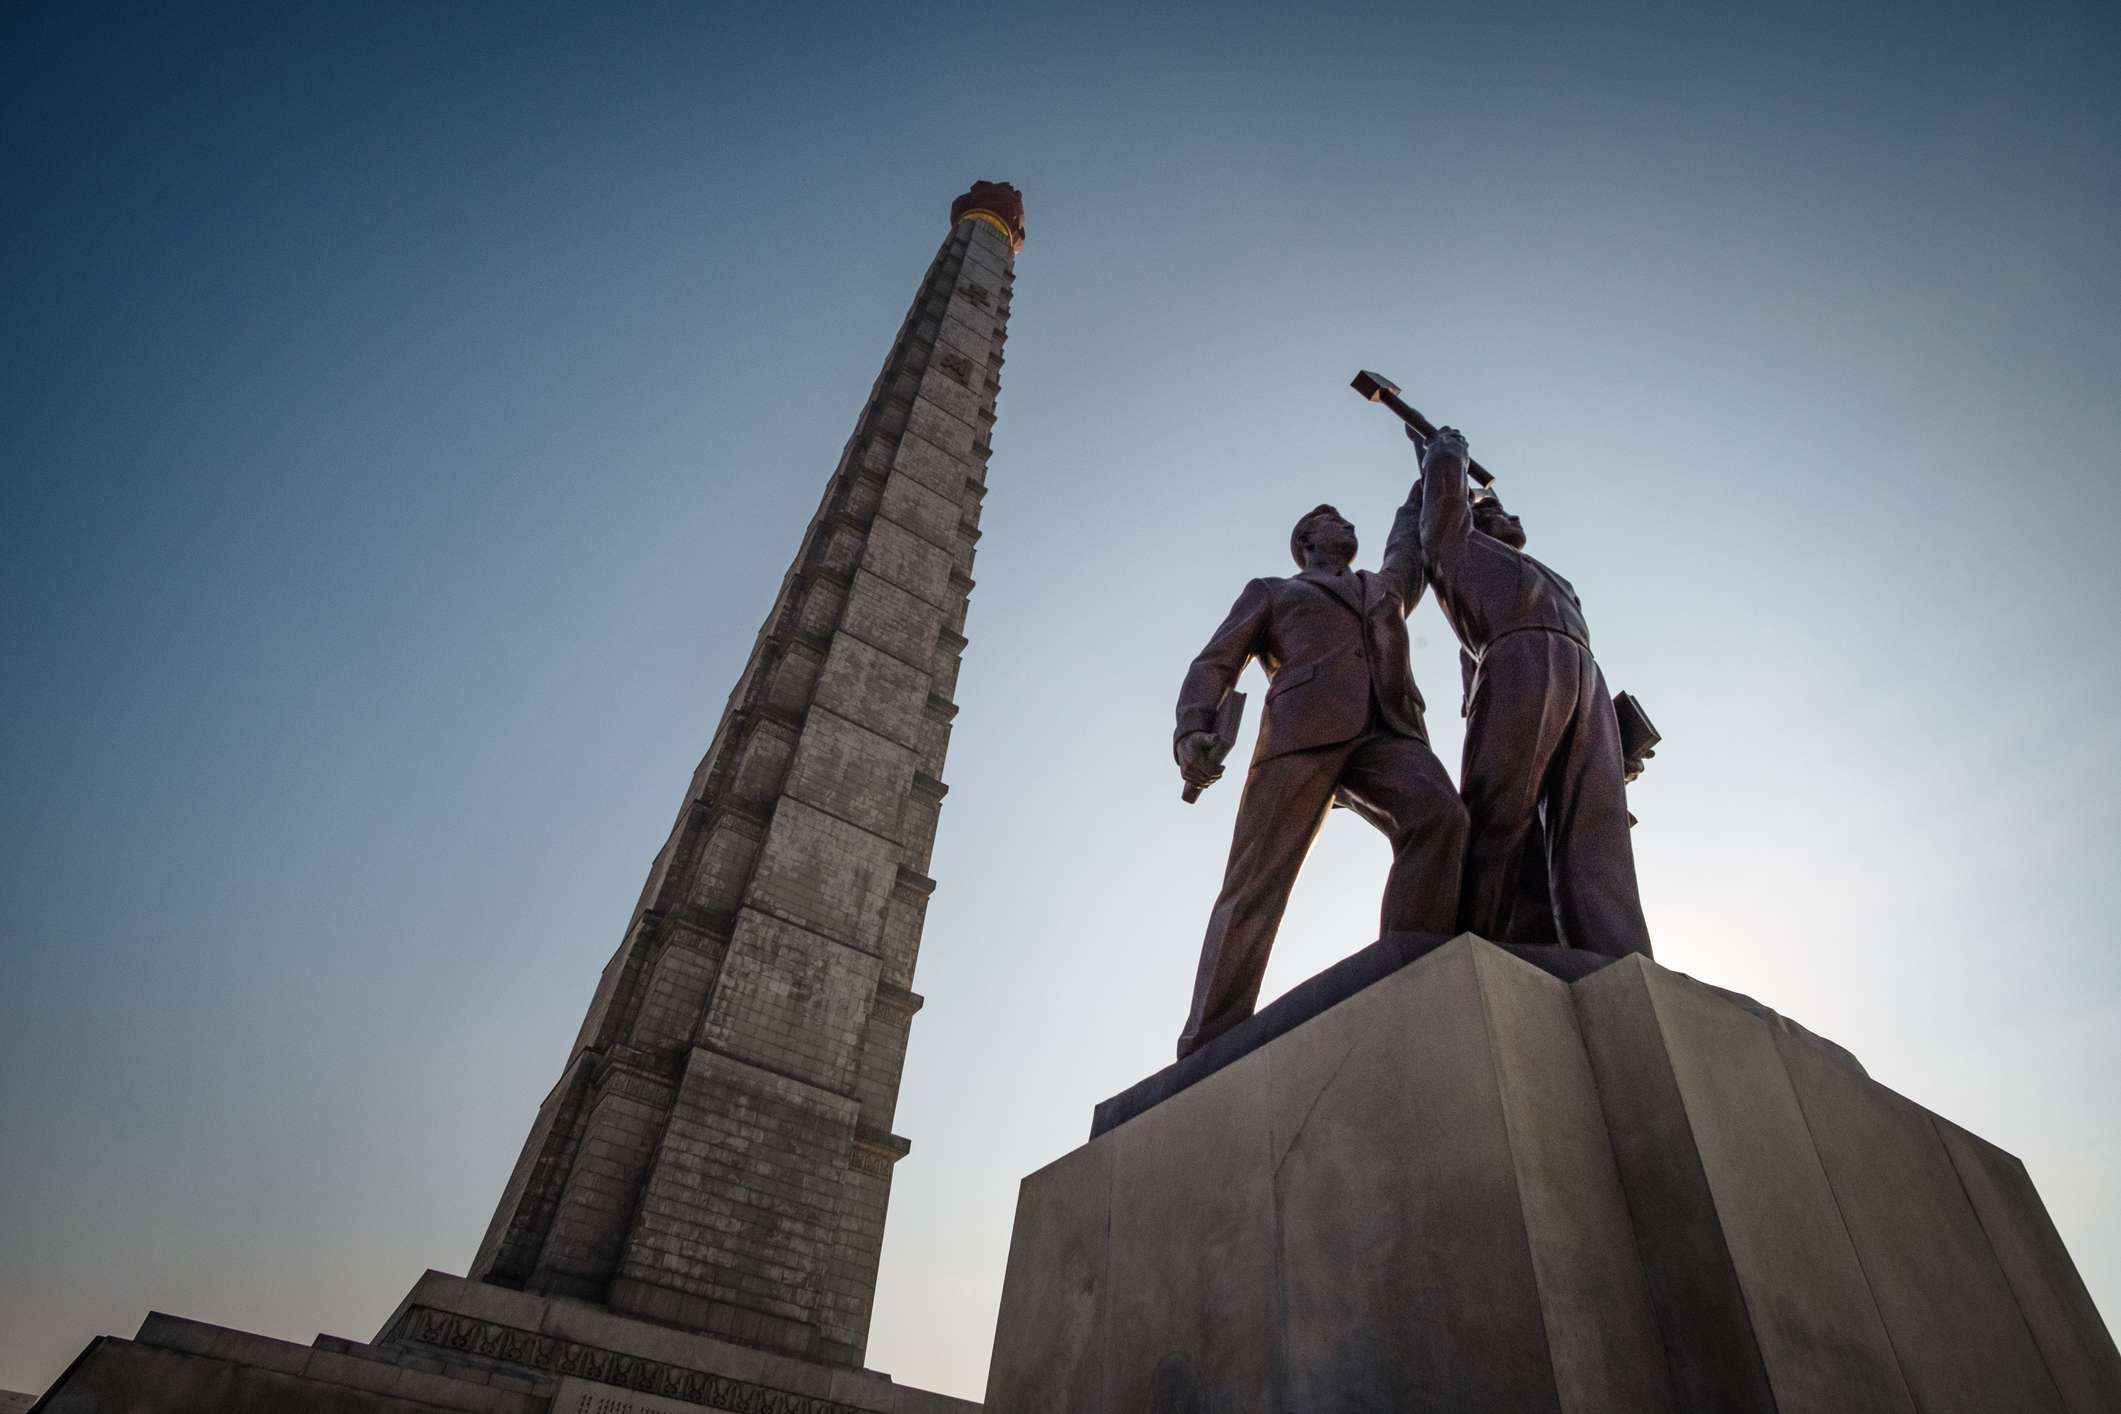 Juche Tower and Workers' Party monument in Pyongyang, North Korea